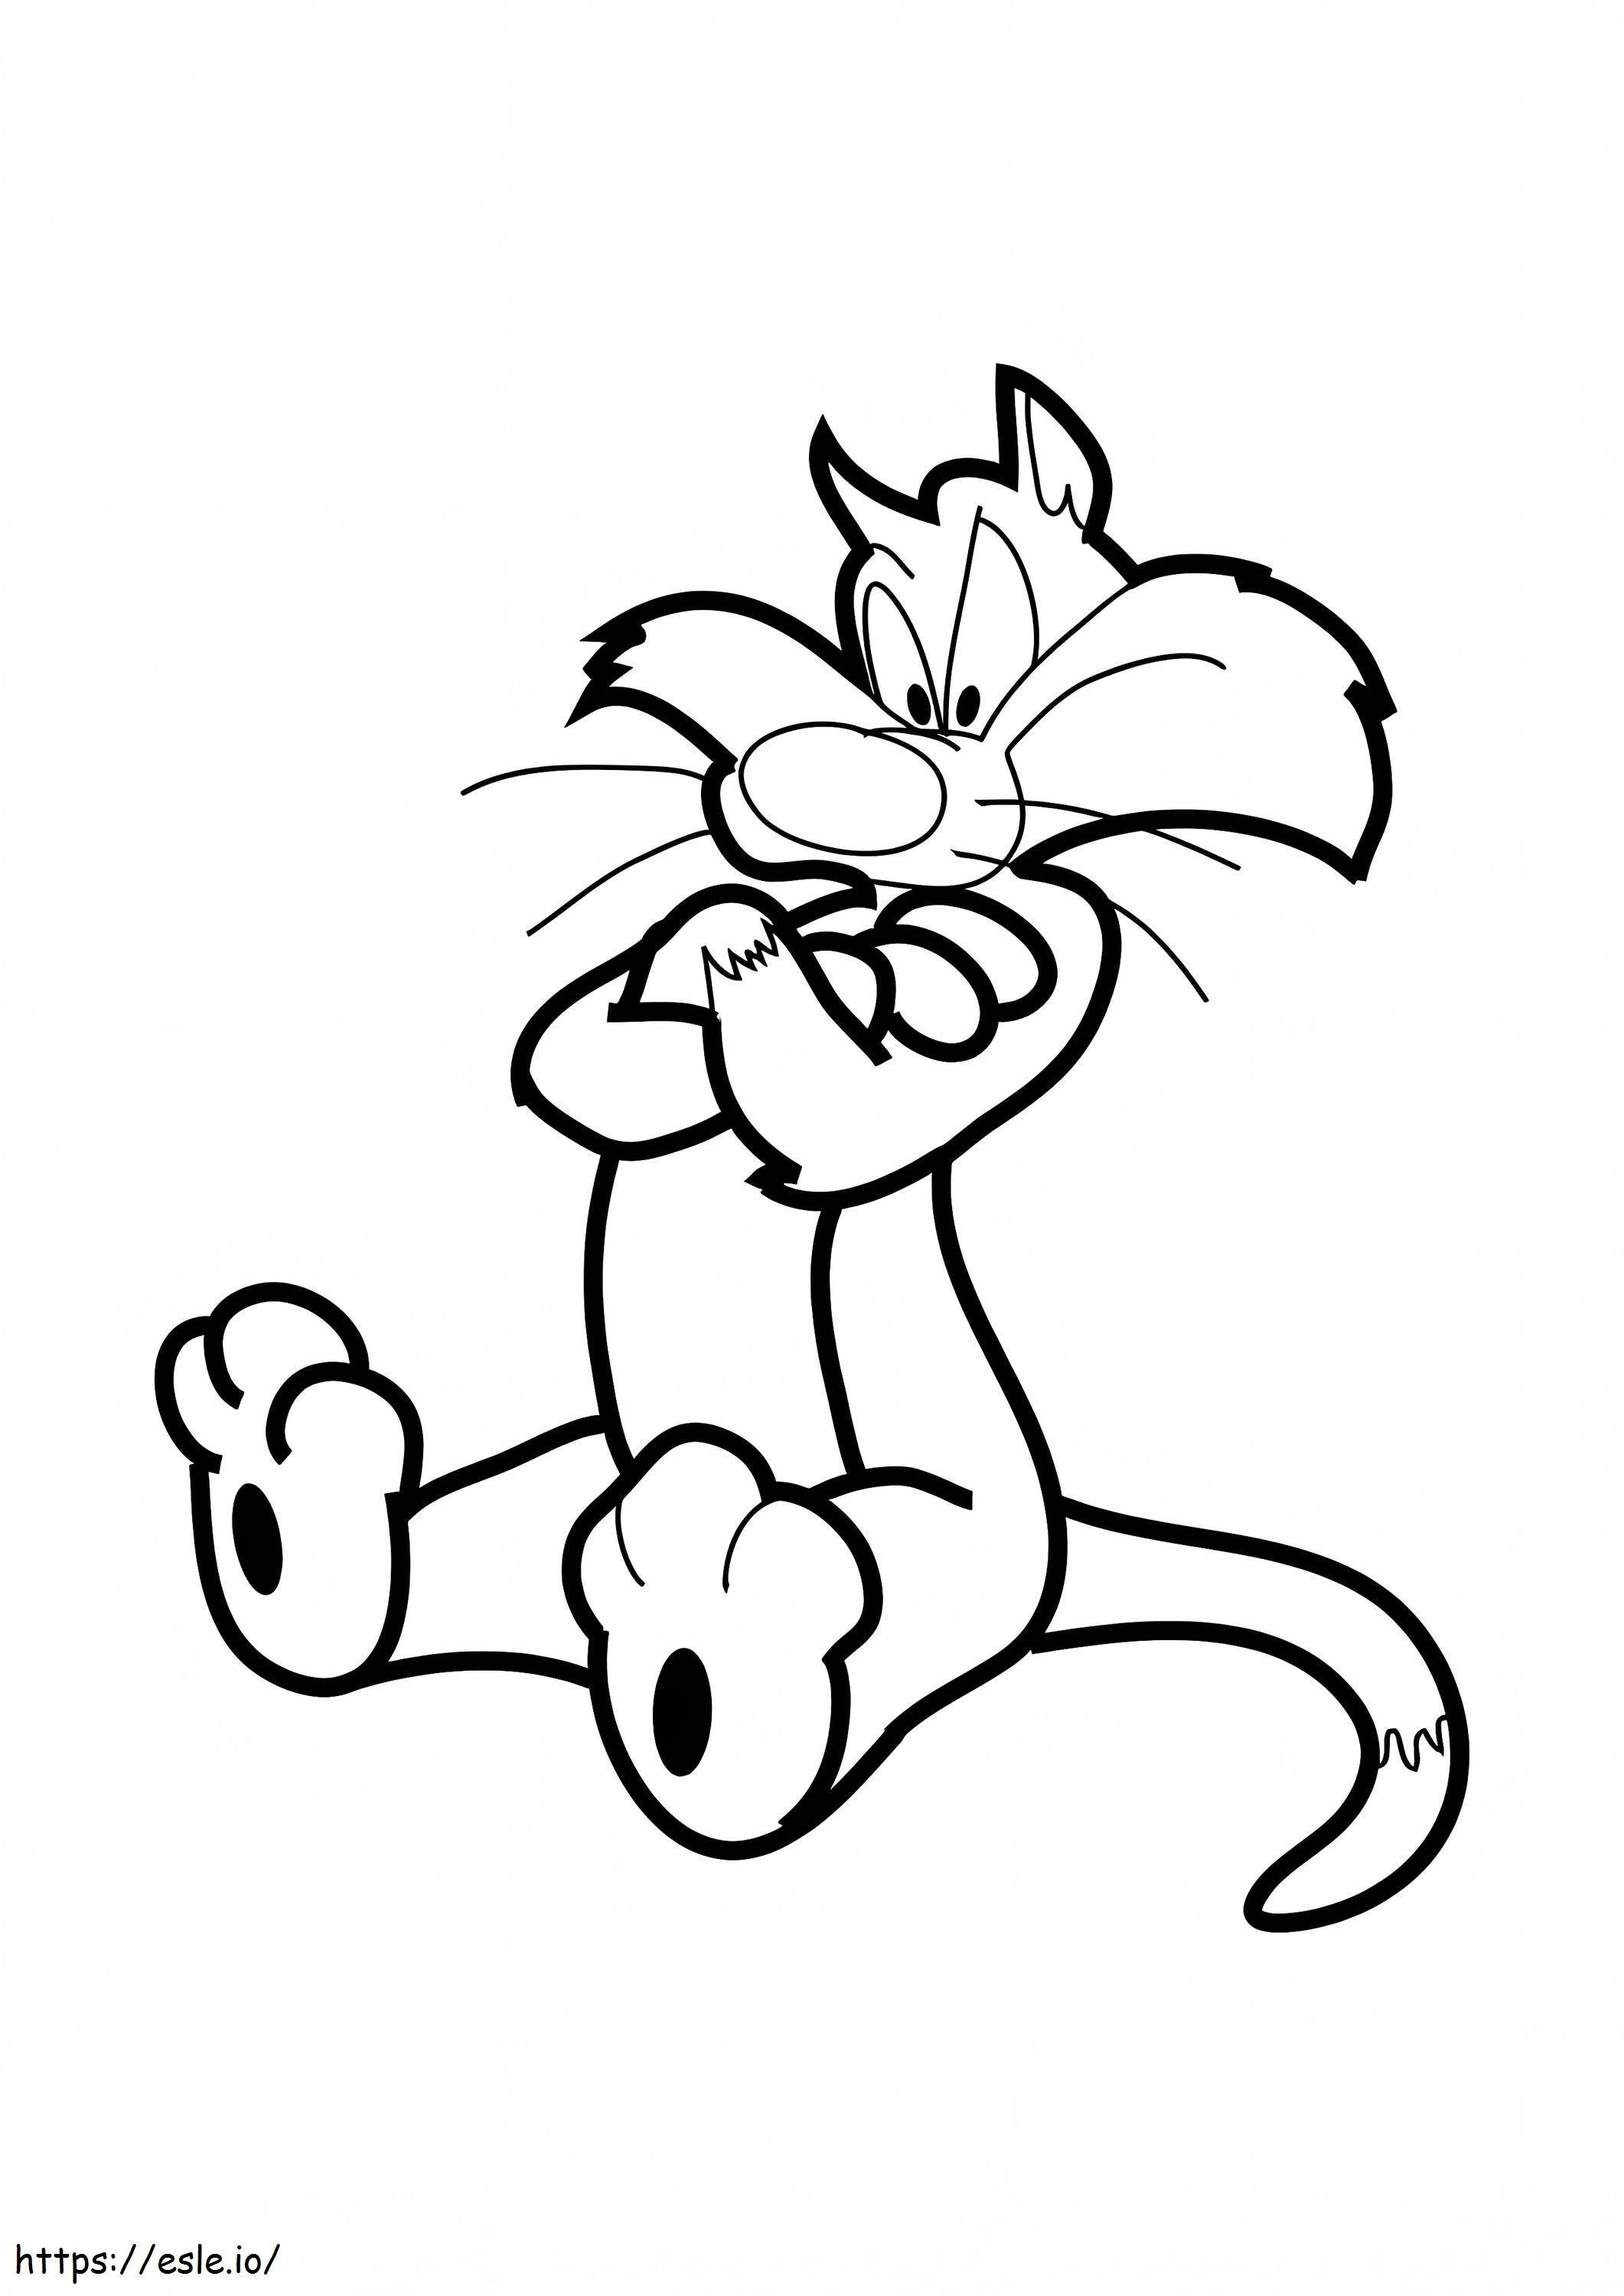 Sylvester Free Printable coloring page